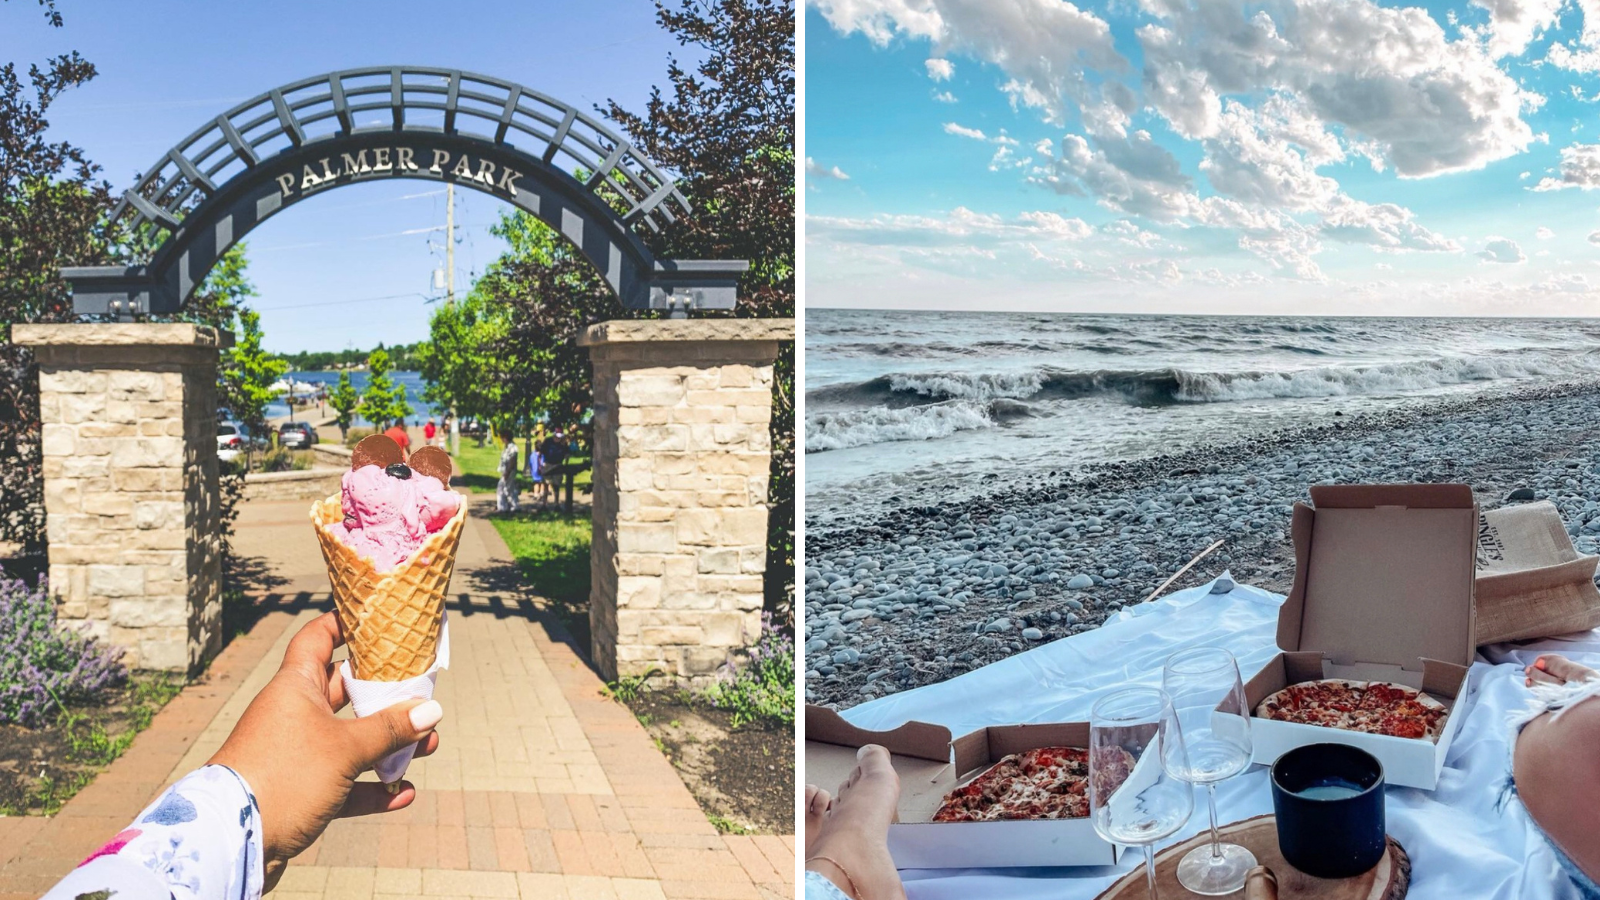 Collage of images including one of an ice cream cone with a park entrance behind it and two pizza boxes on a picnic blanket on the beach